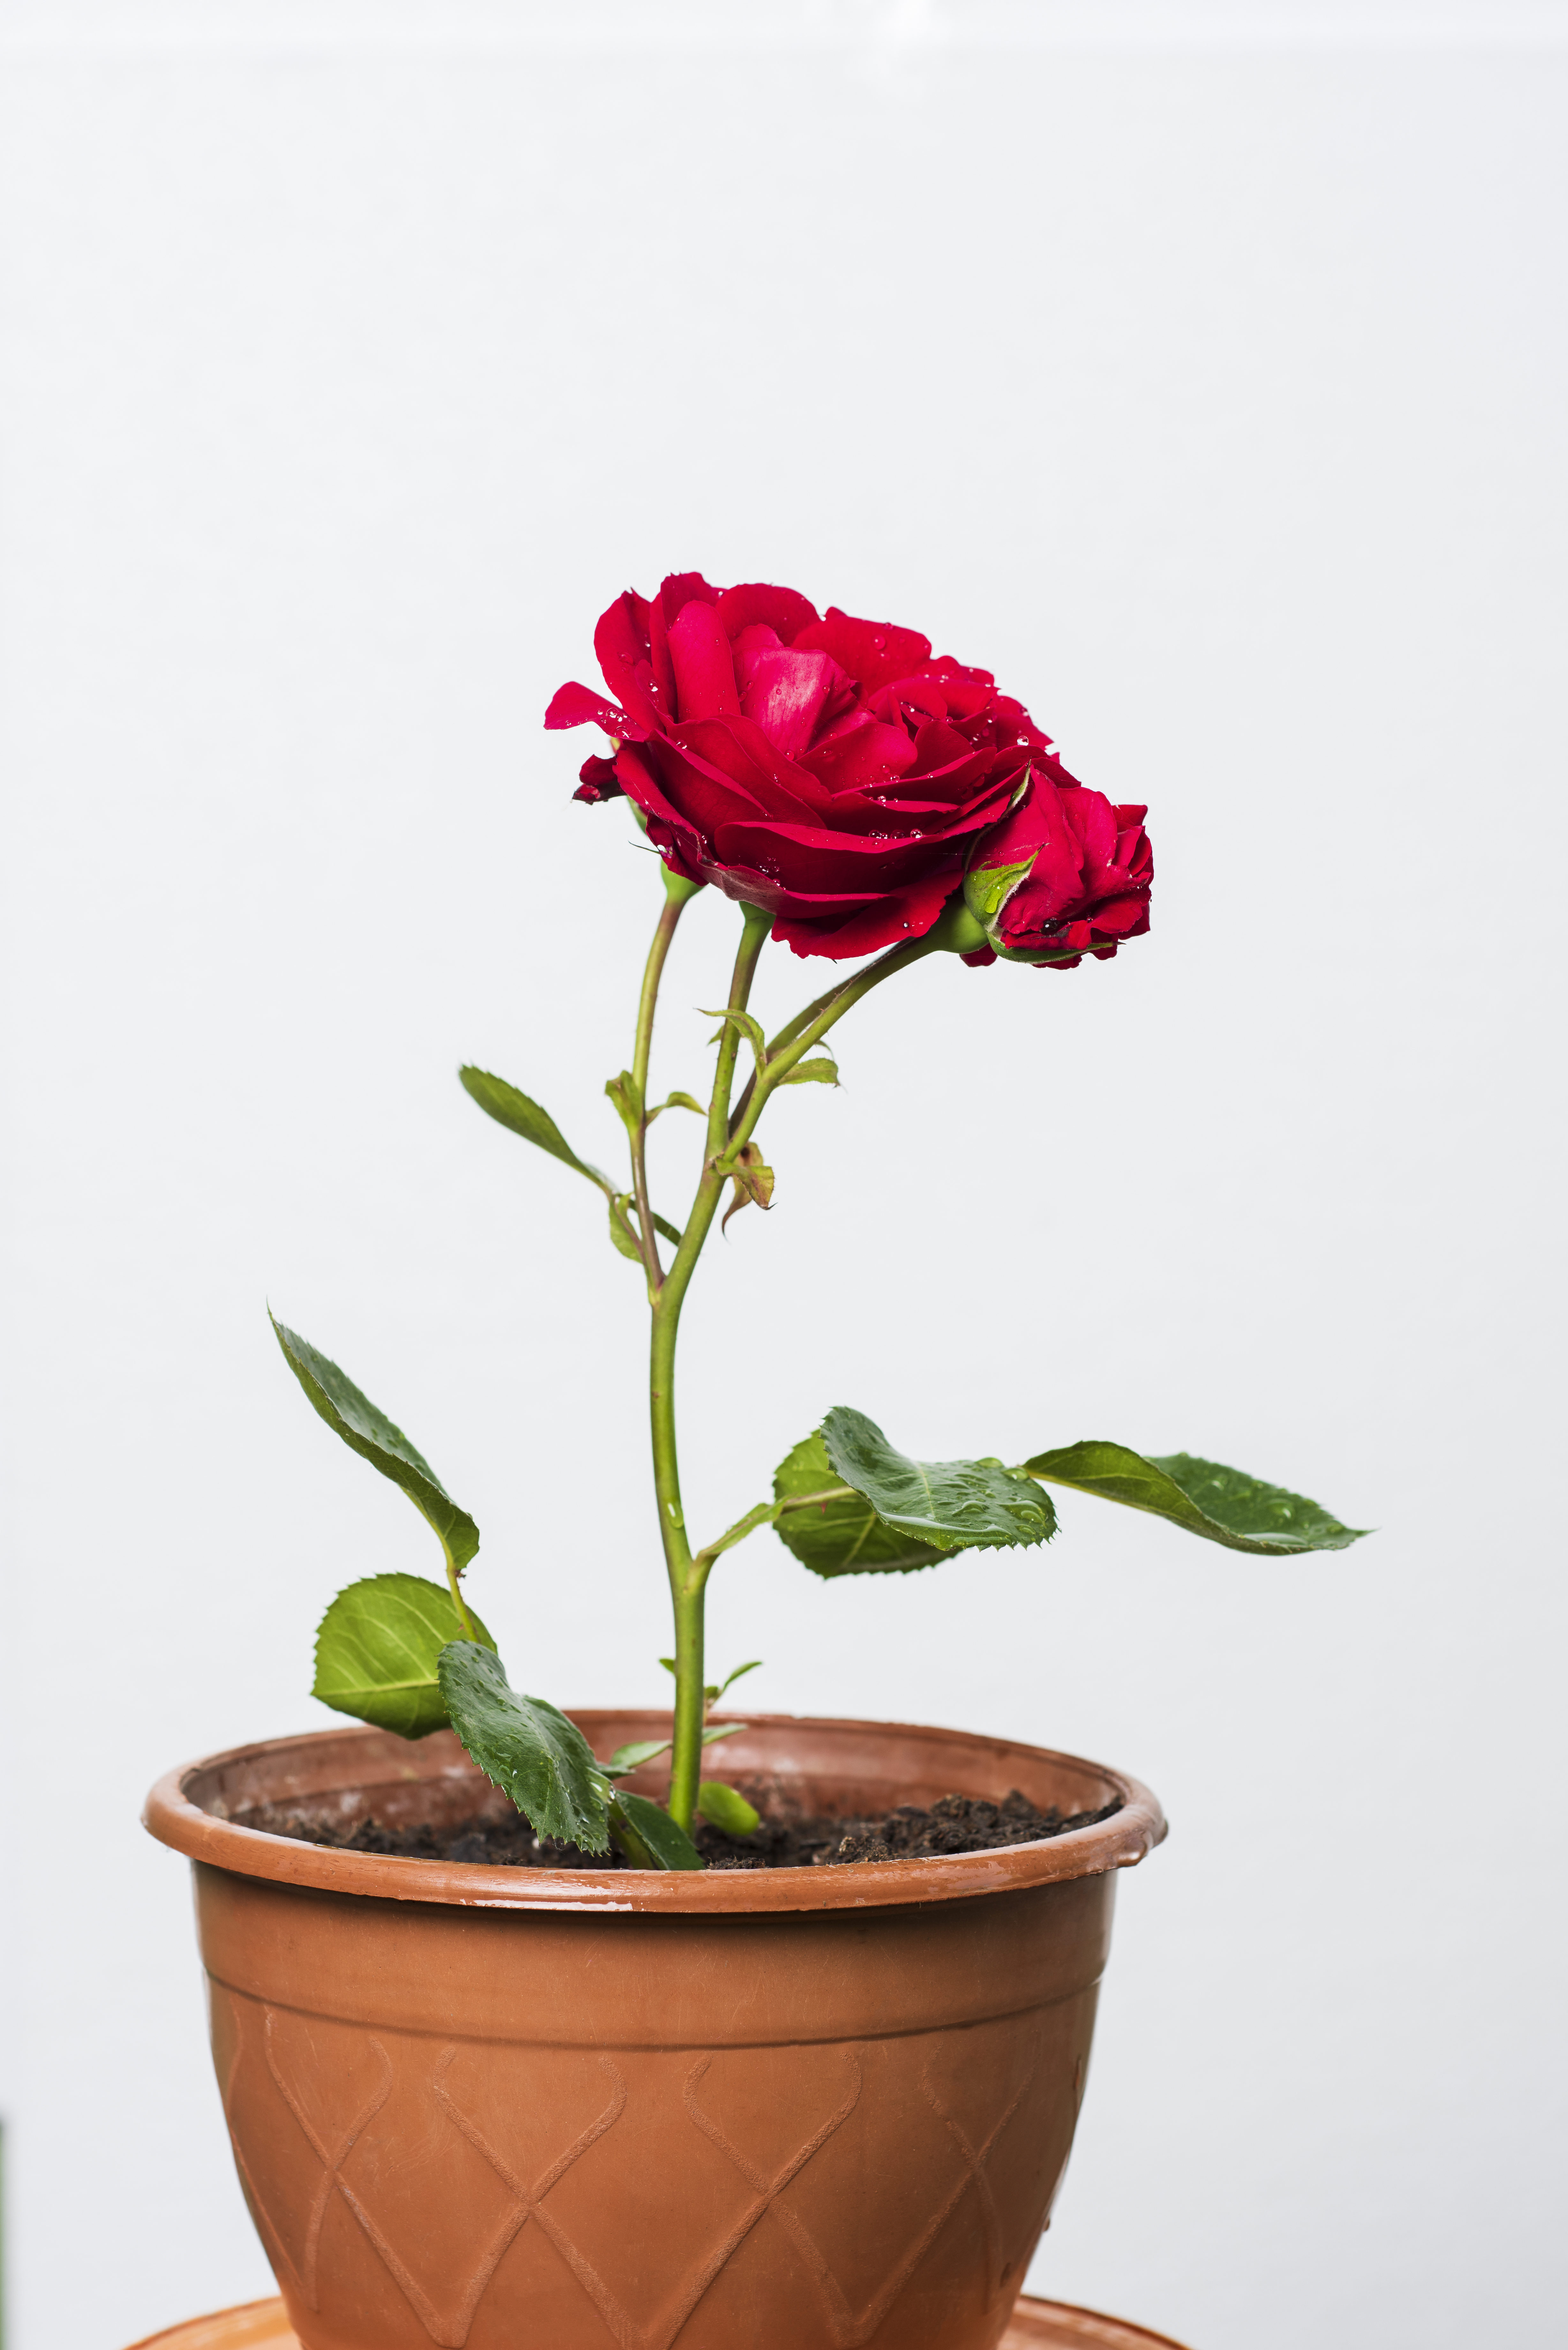 Two red roses in a pot against a white background.